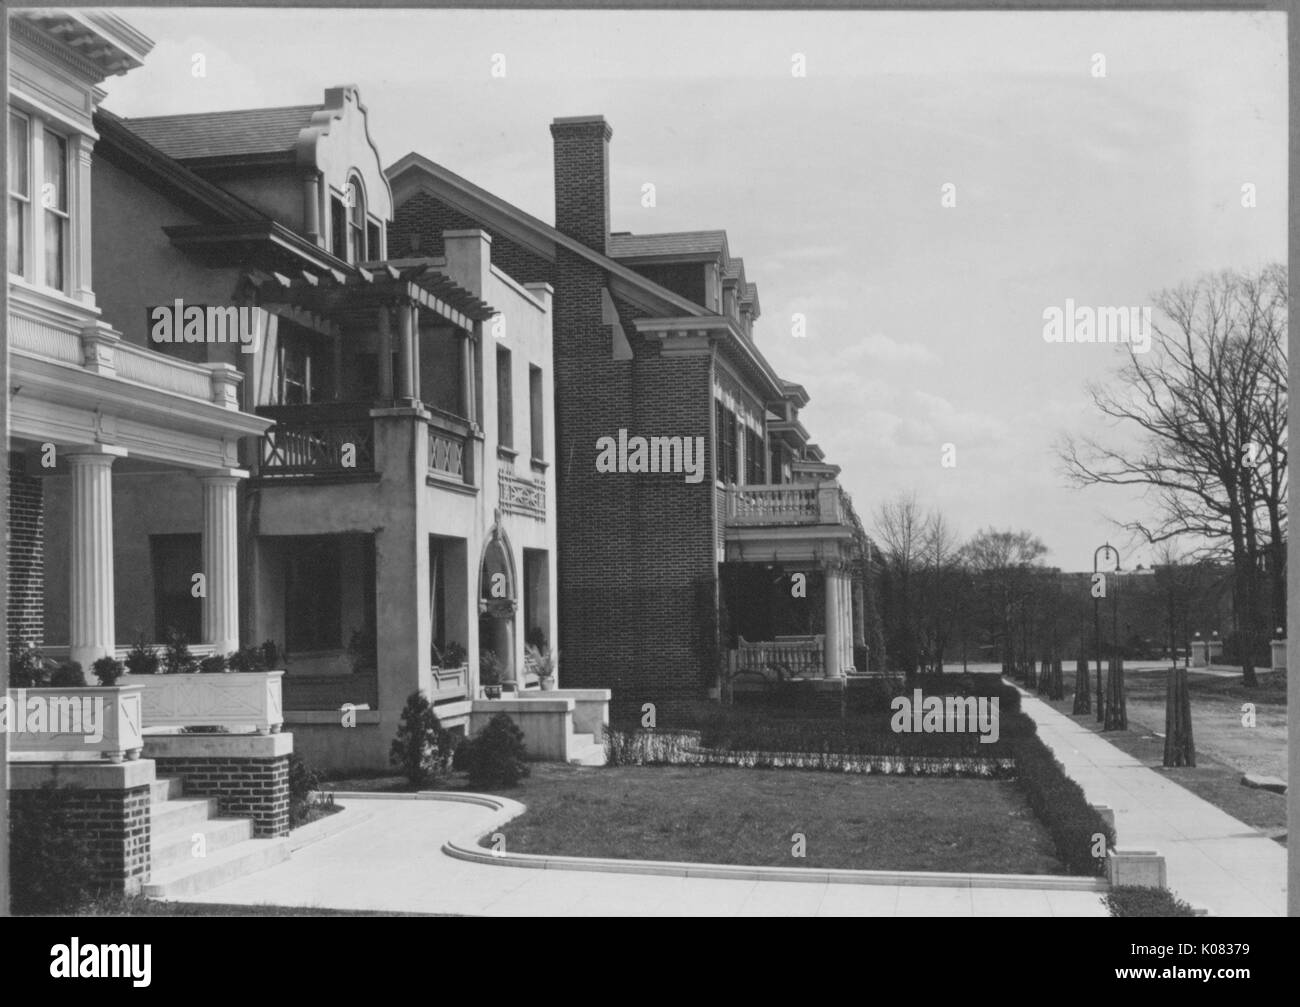 Diagonal shot of three houses, front porches, balconies, two-stories, minimal but neat landscaping, first and third houses are brickwork, chimney of third house depicted; Roland Park/Guilford, 1910. This image is from a series documenting the construction and sale of homes in the Roland Park/Guilford neighborhood of Baltimore, a streetcar suburb and one of the first planned communities in the United States. Stock Photo